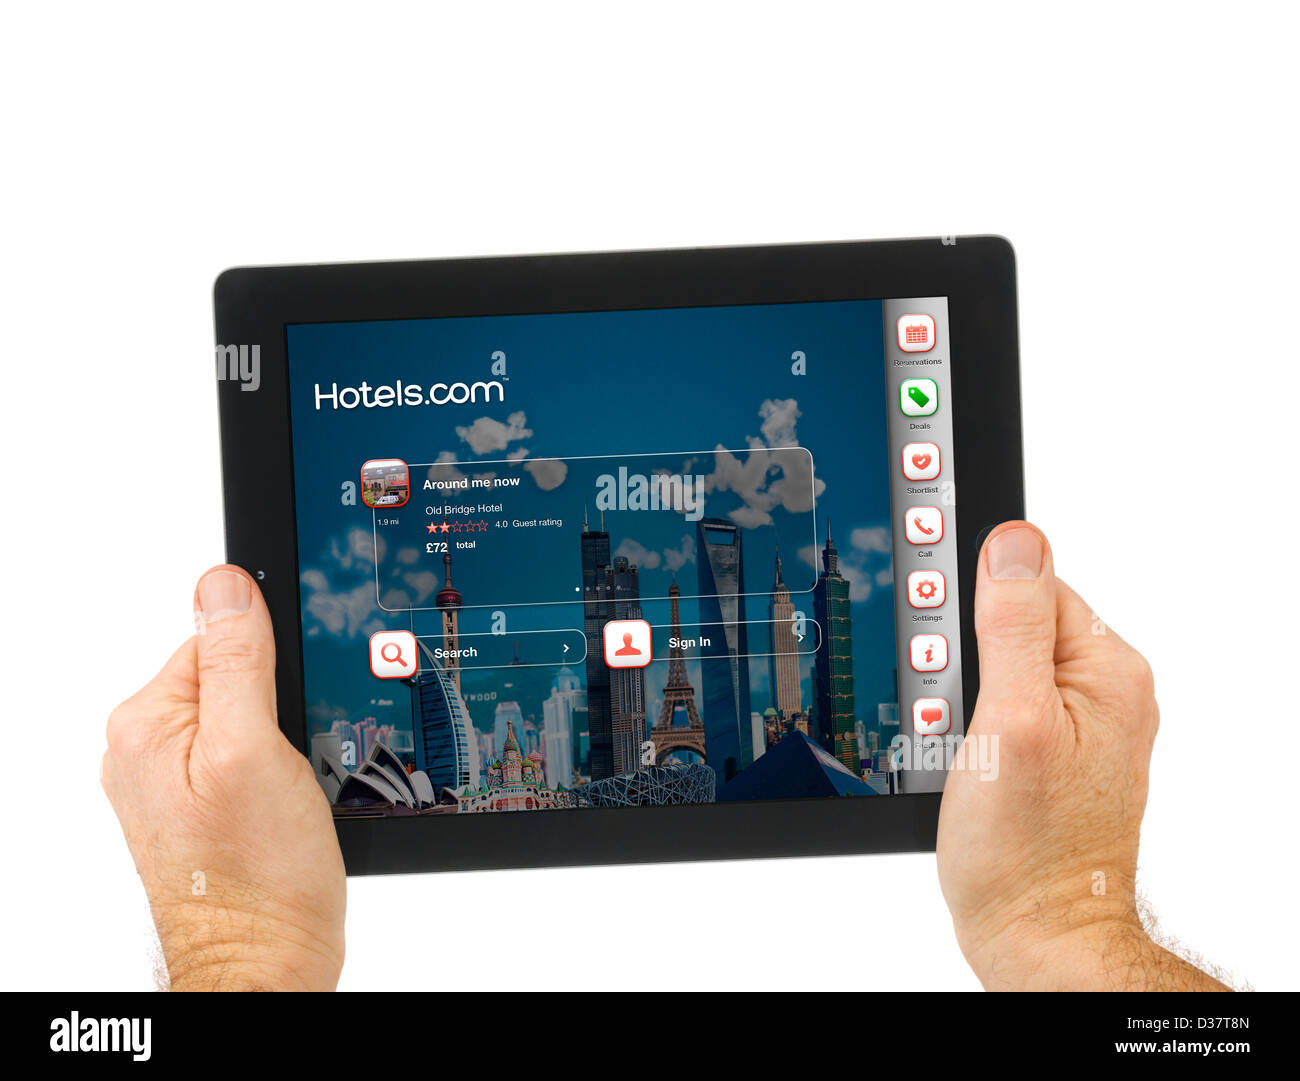 The Hotels.com online booking app viewed on a 4th generation Apple iPad tablet computer Stock Photo